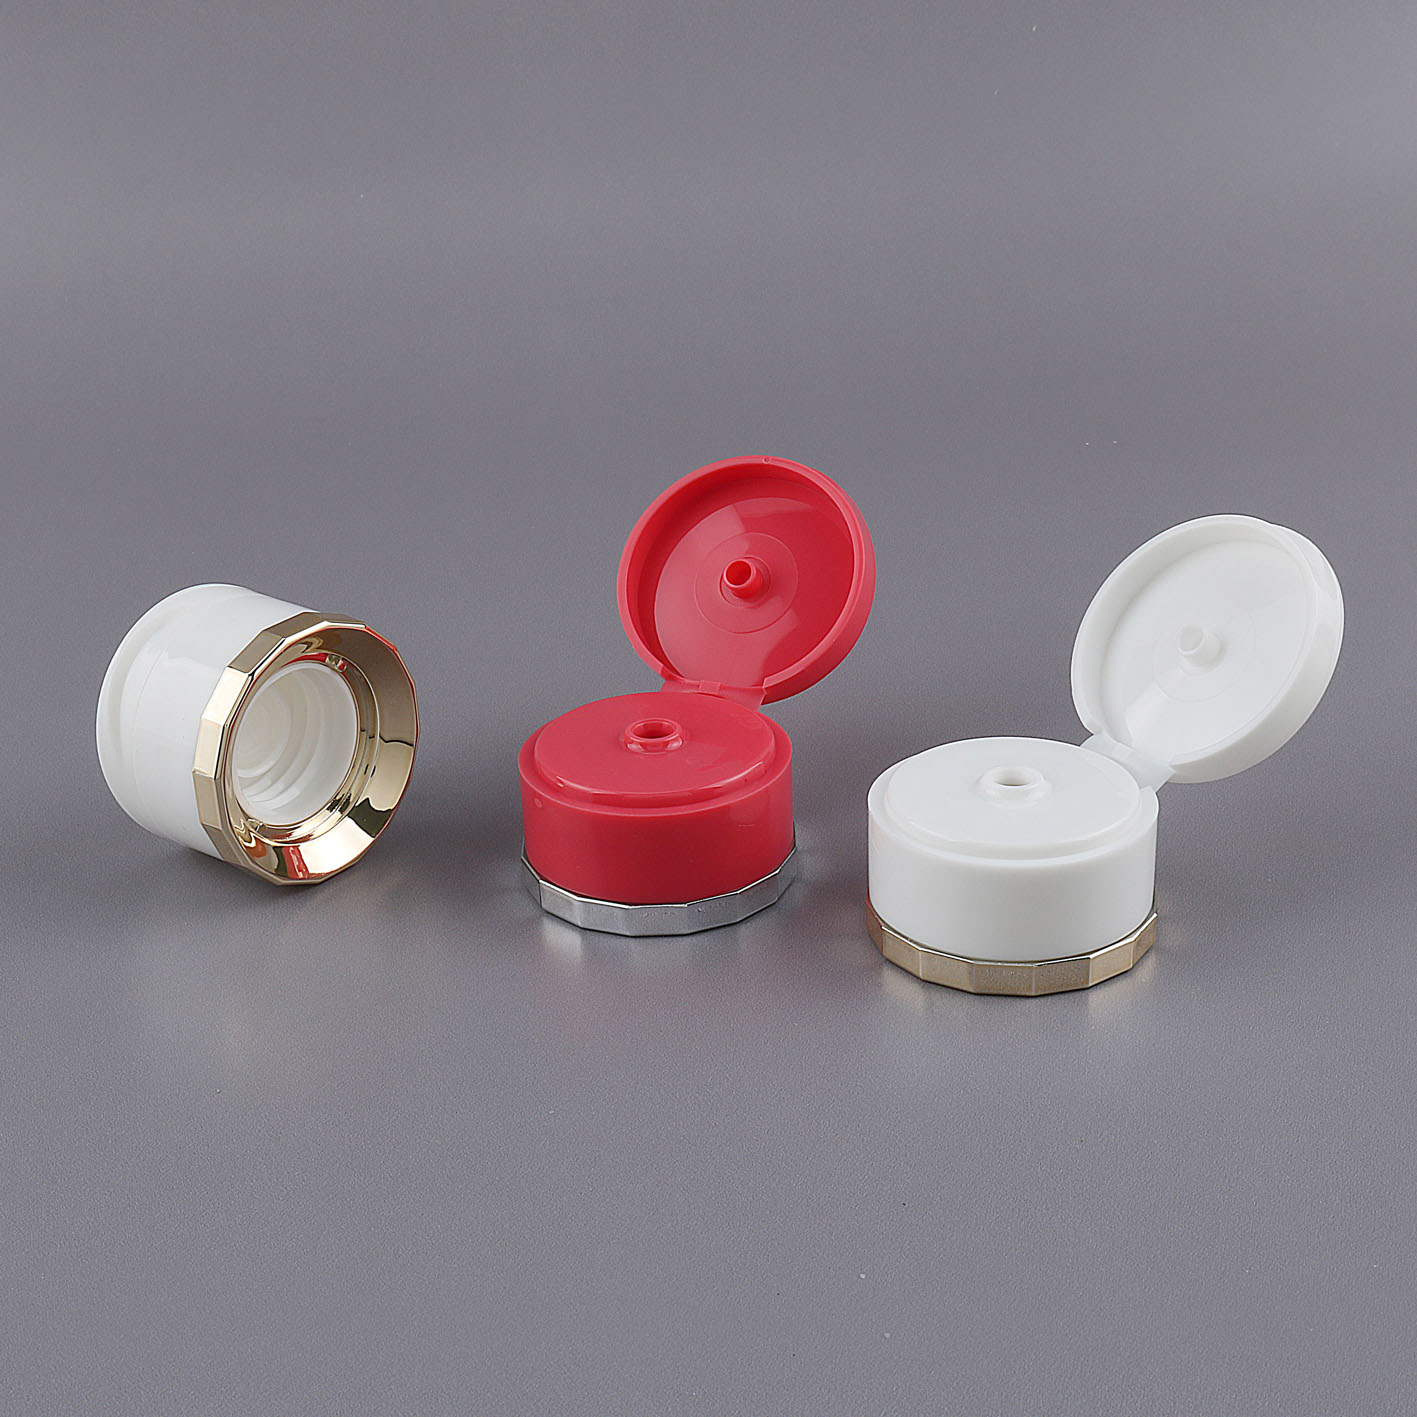 40mm_Diameter_Customized_Facial_Mask_Tubes_with_Double-Layer_Flip_Top_Caps3